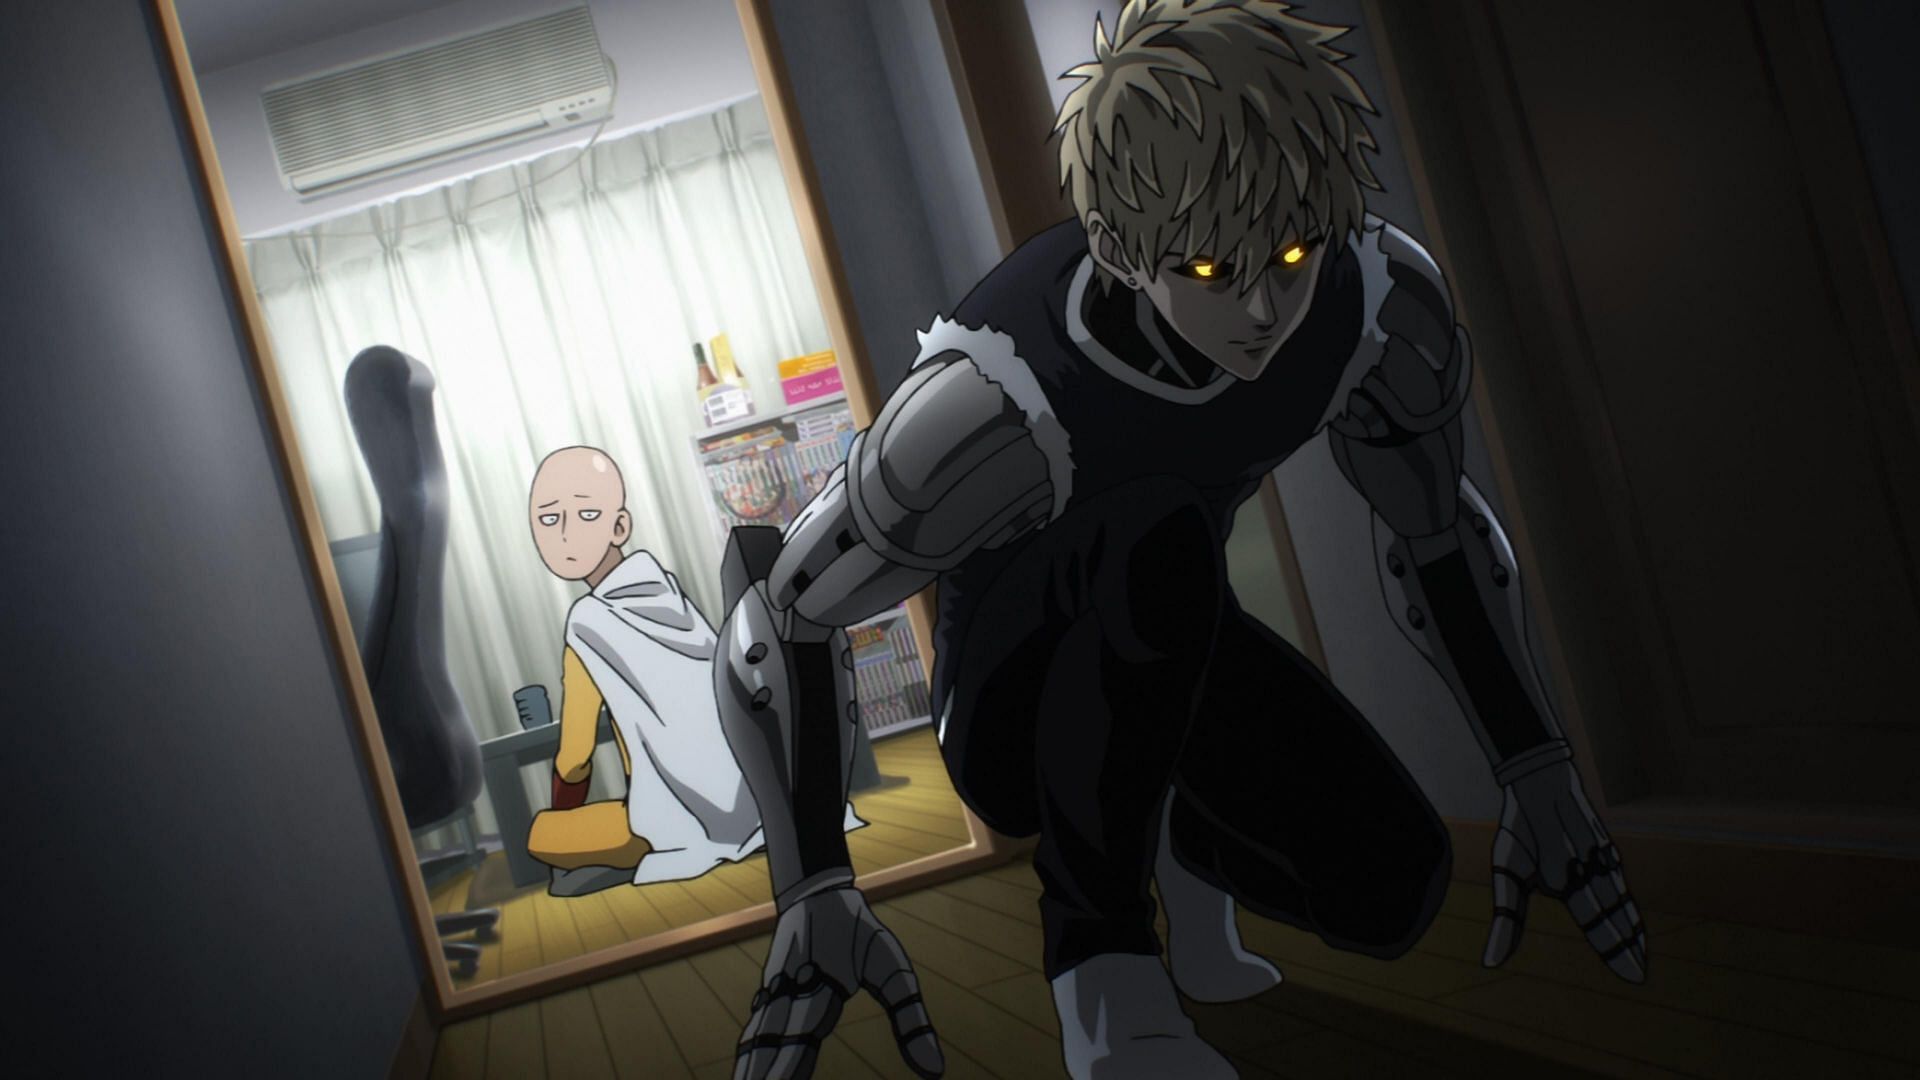 Saitama and Genos as seen in One Punch Man